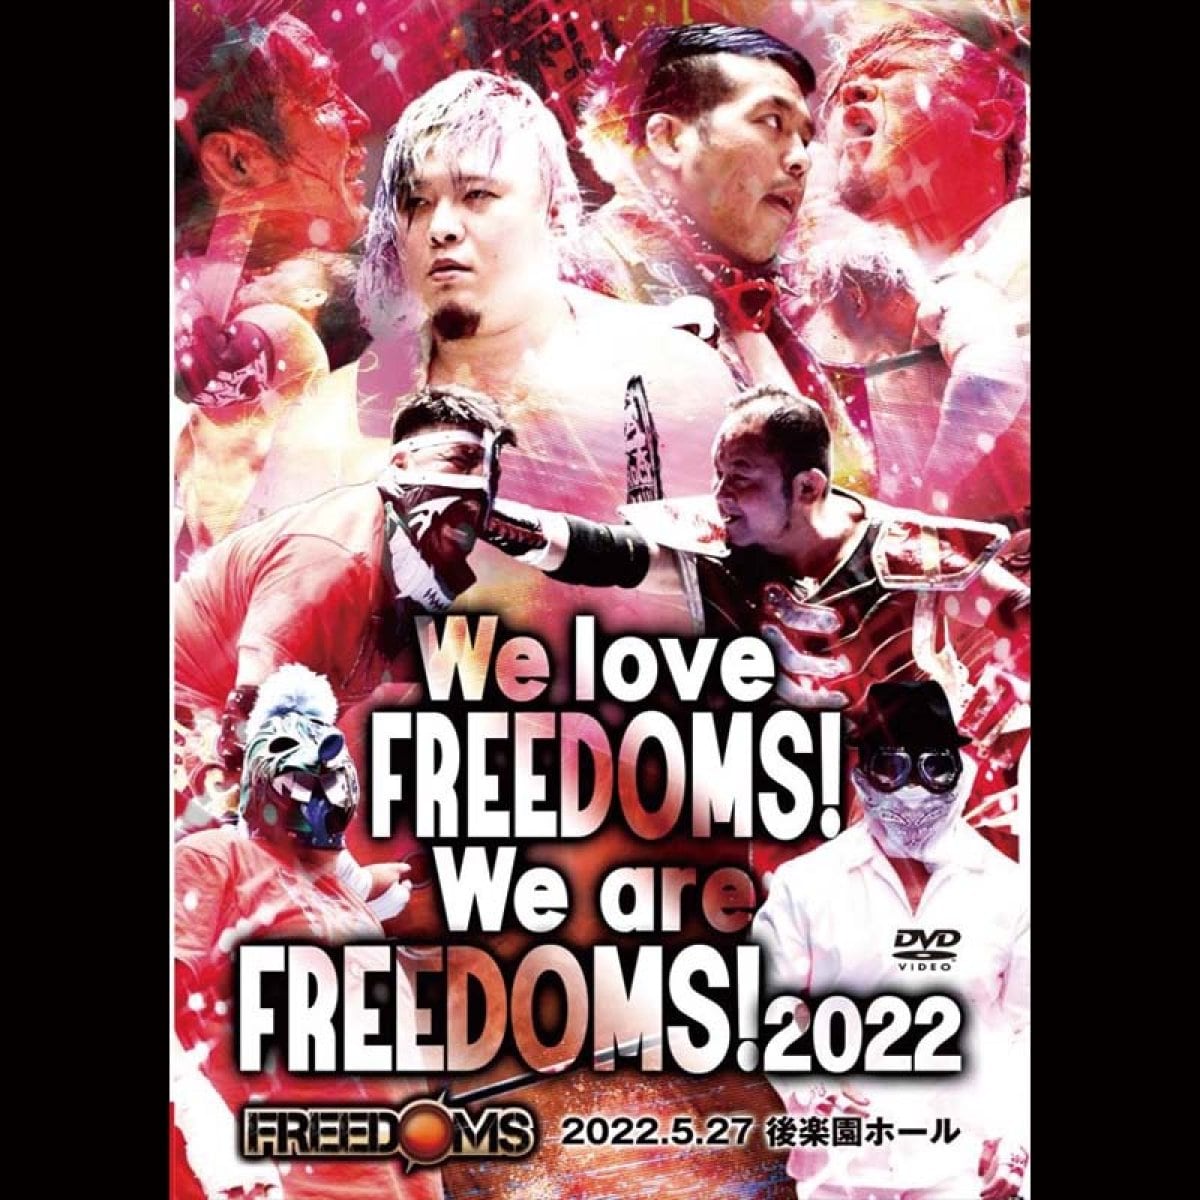 [DVD] 2022.5.27 後楽園ホール「We love FREEDOMS! We are FREEDOMS！2022 」